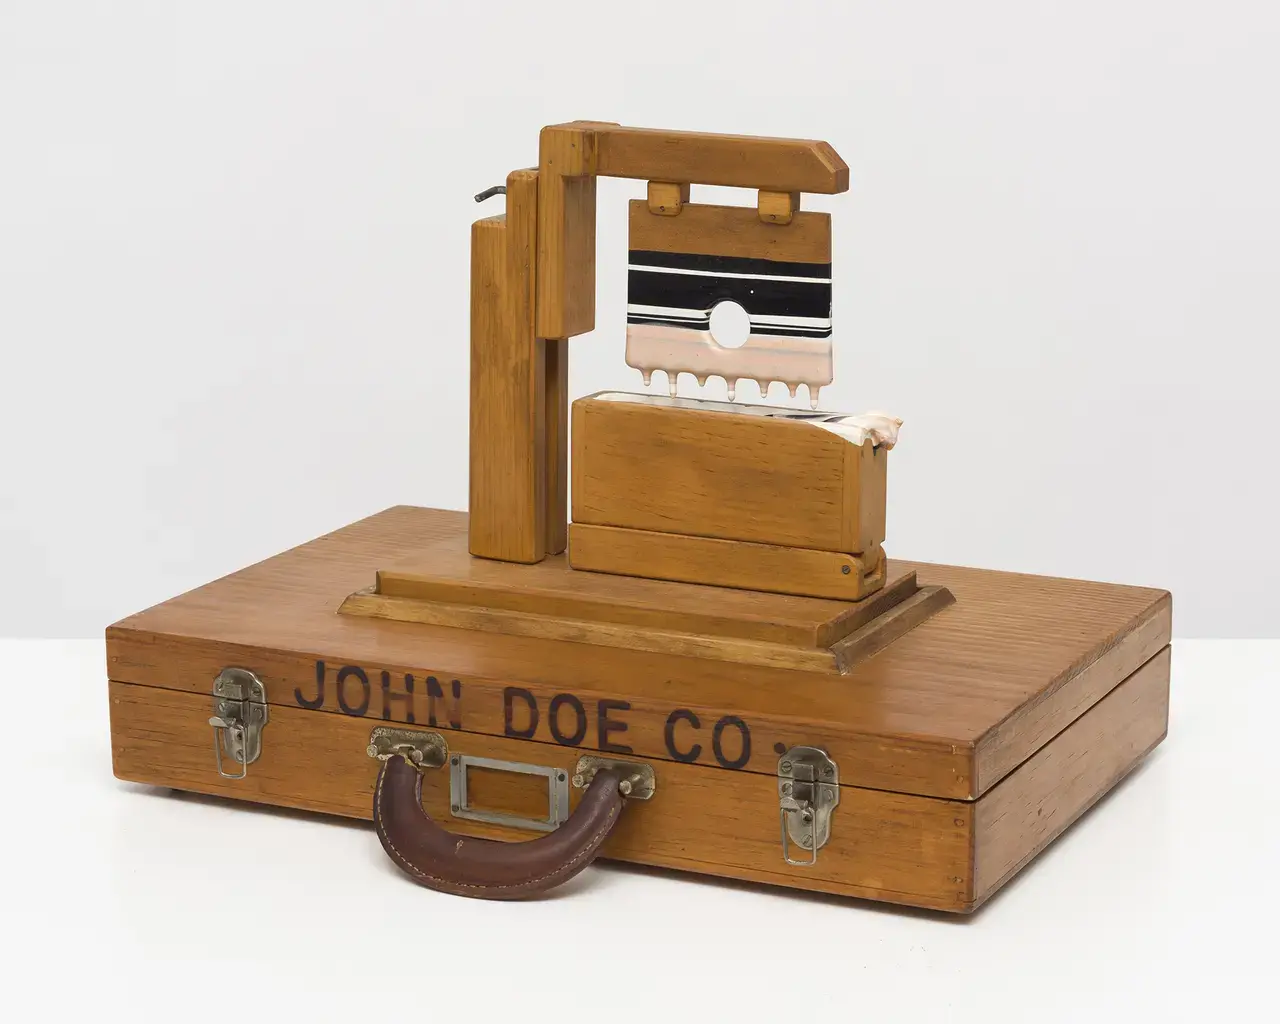 Carl Cheng/John Doe Co., Art Tool Paint Experiments, 1972; paint dipper in display box, wood, paint; 8" x 18" x 12".&nbsp;Photo by Ruben Diaz, courtesy of Carl Cheng and Philip Martin Gallery.&nbsp;